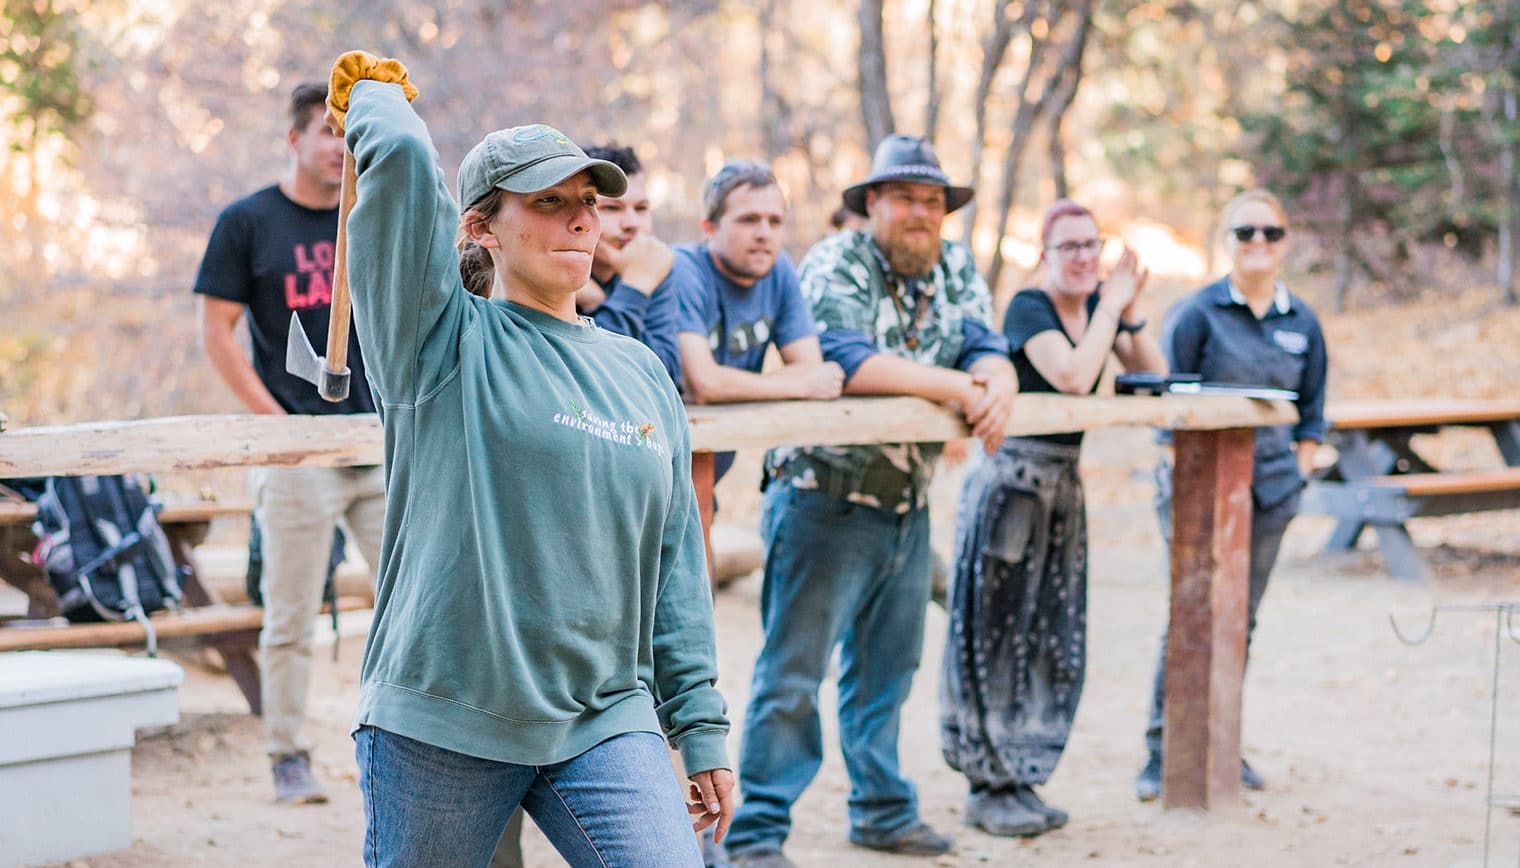 A woman throwing a tomahawk.